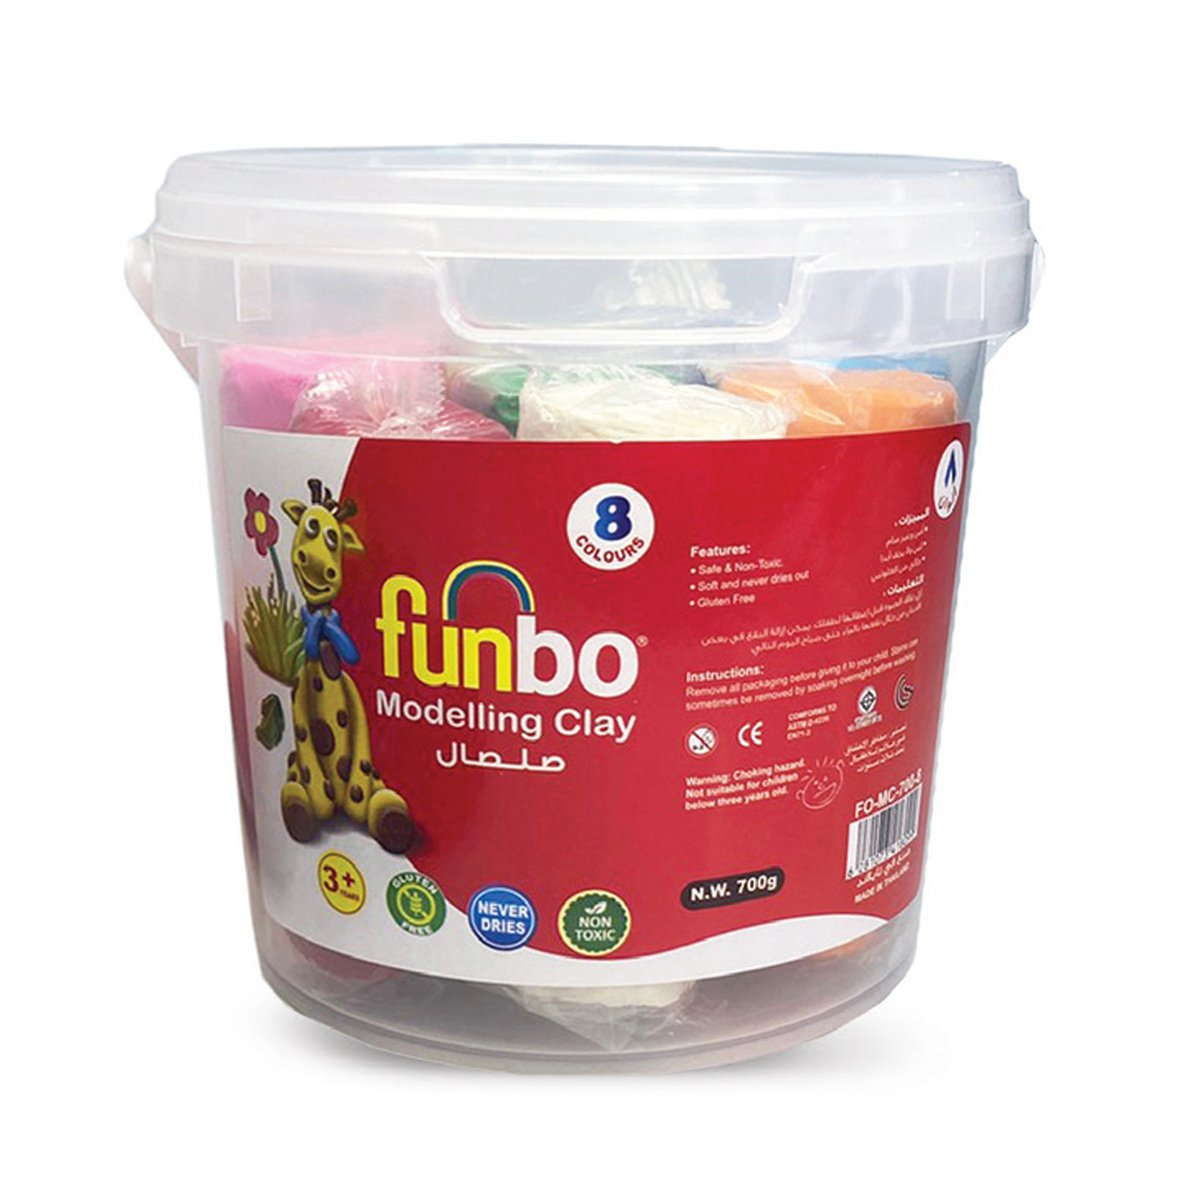 Funbo Modelling Clay Set FO-06 Assorted